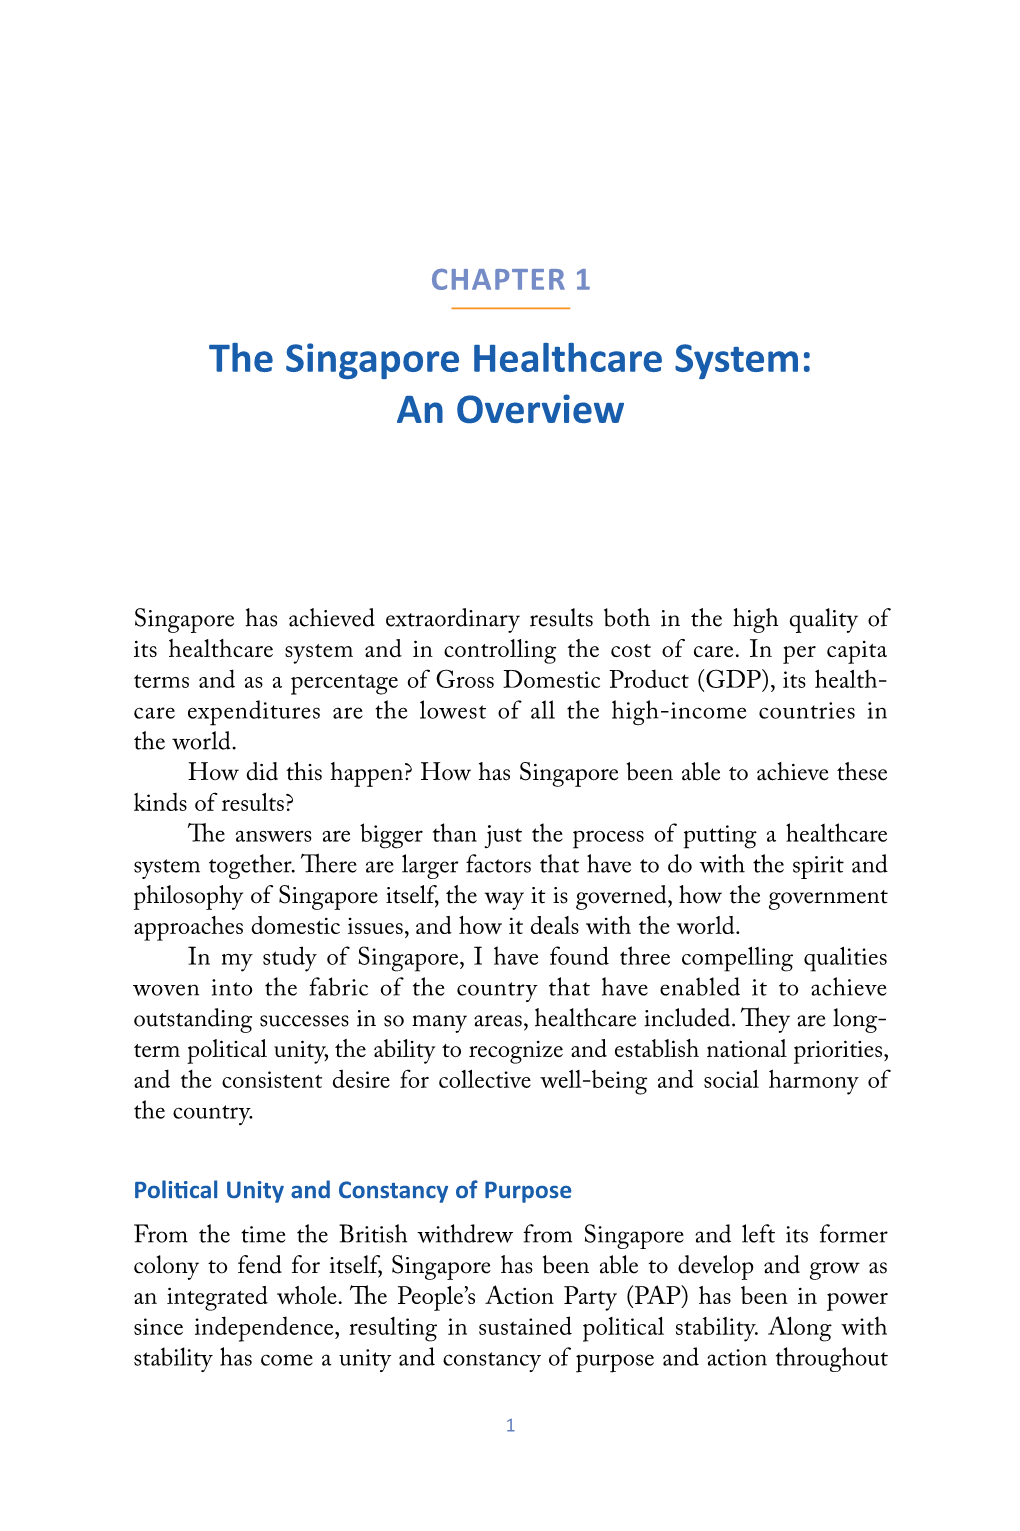 The Singapore Healthcare System: an Overview